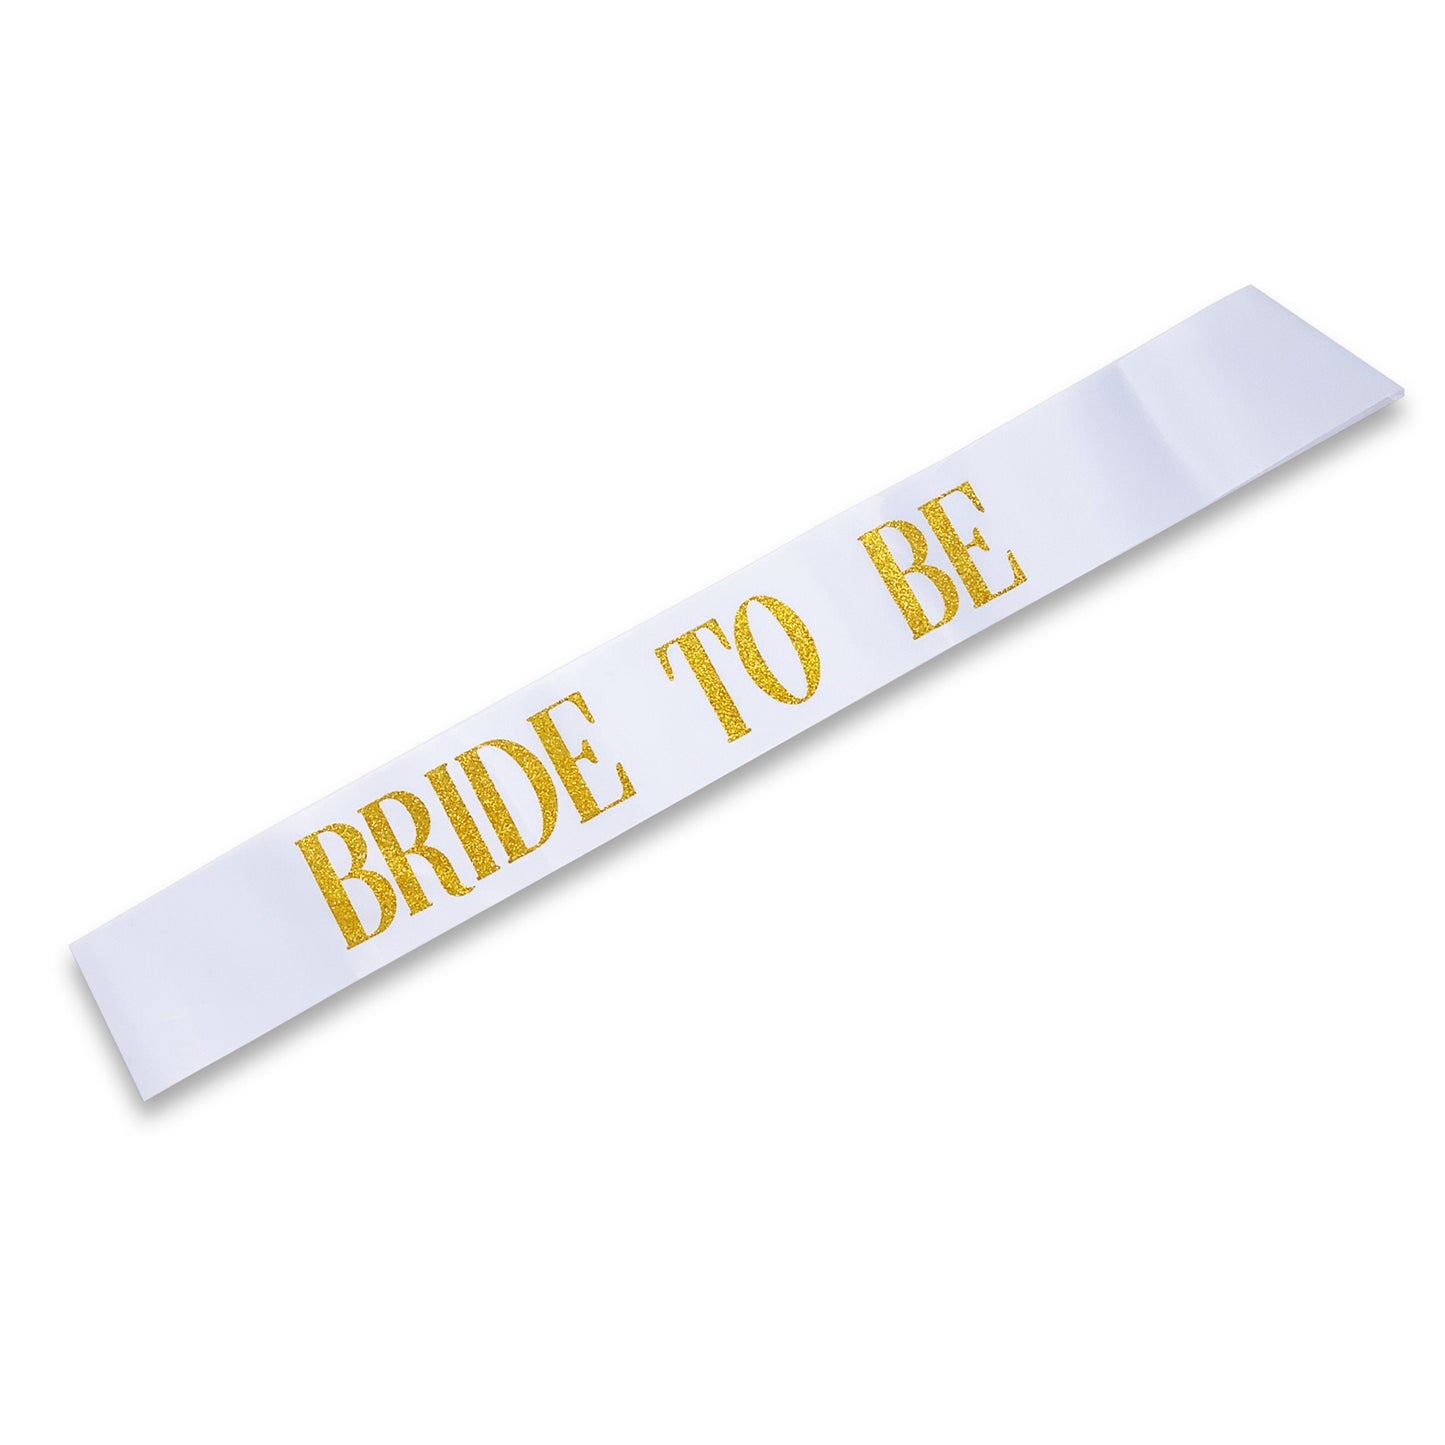 Bridal Sashes for Brides Maid of Honor Humorous Funny Wearable Wedding Bridal Party Sashes